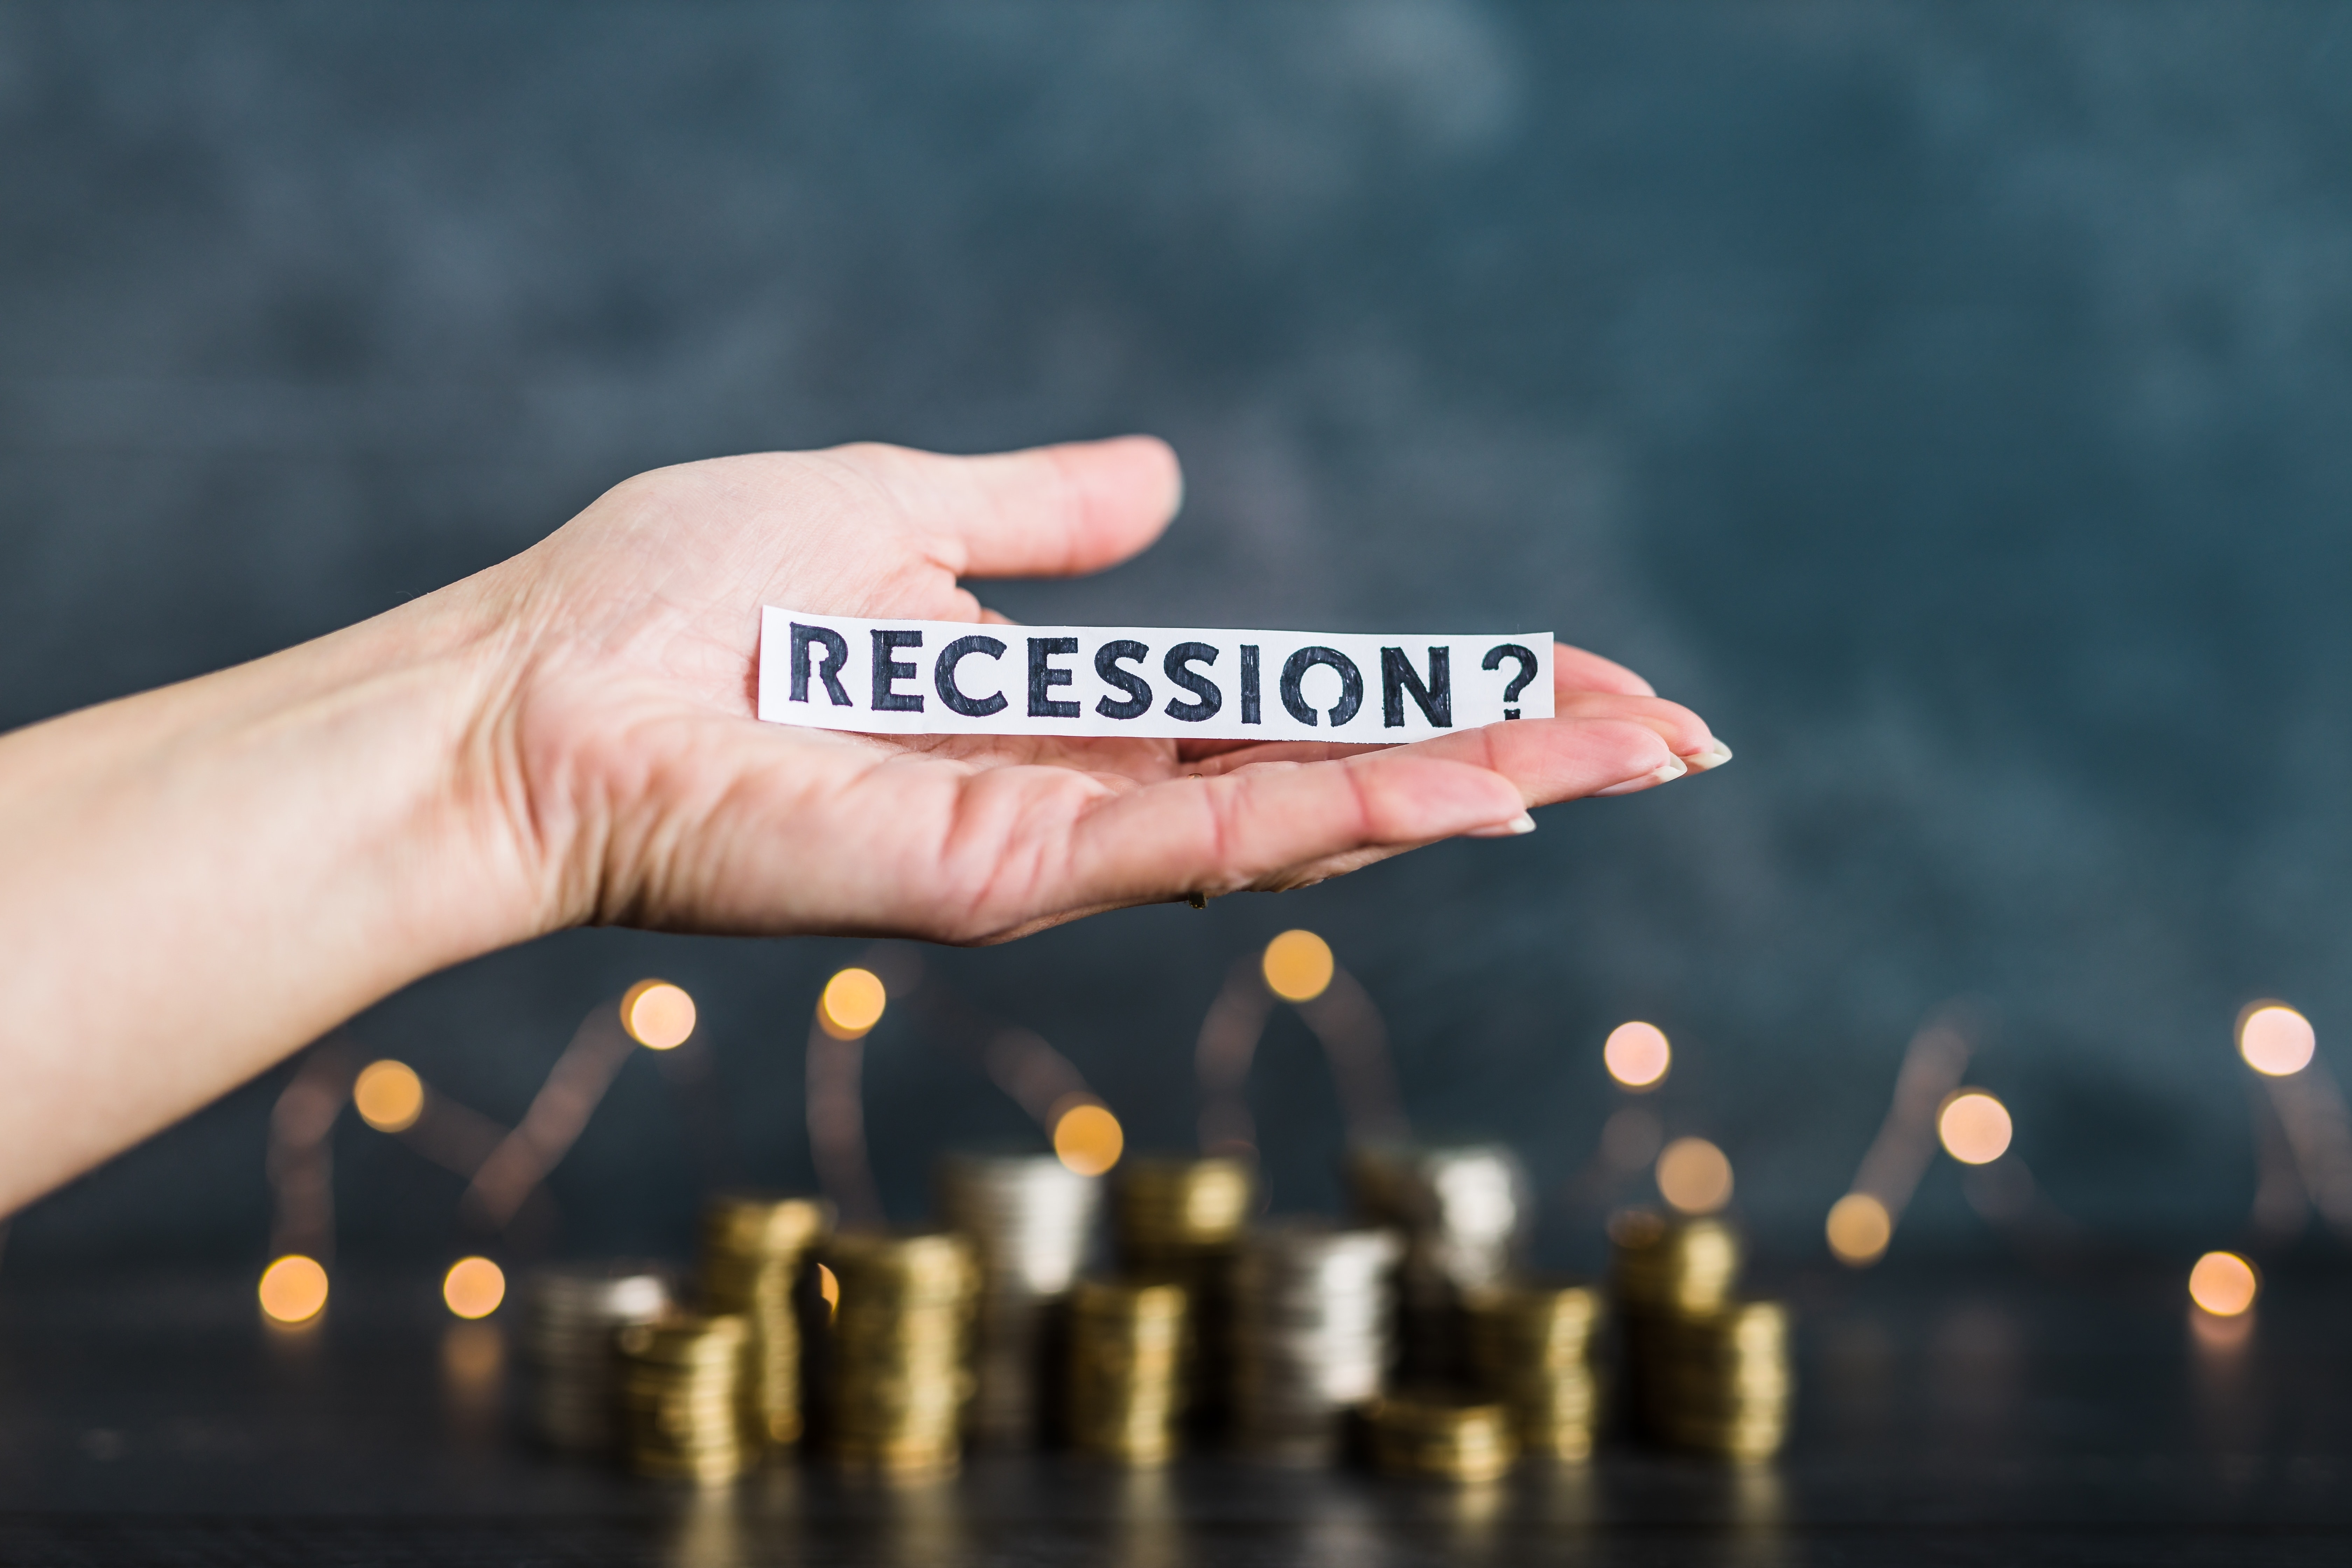 Global CEOs See Recession, But One That's Only 'Mild and Short'